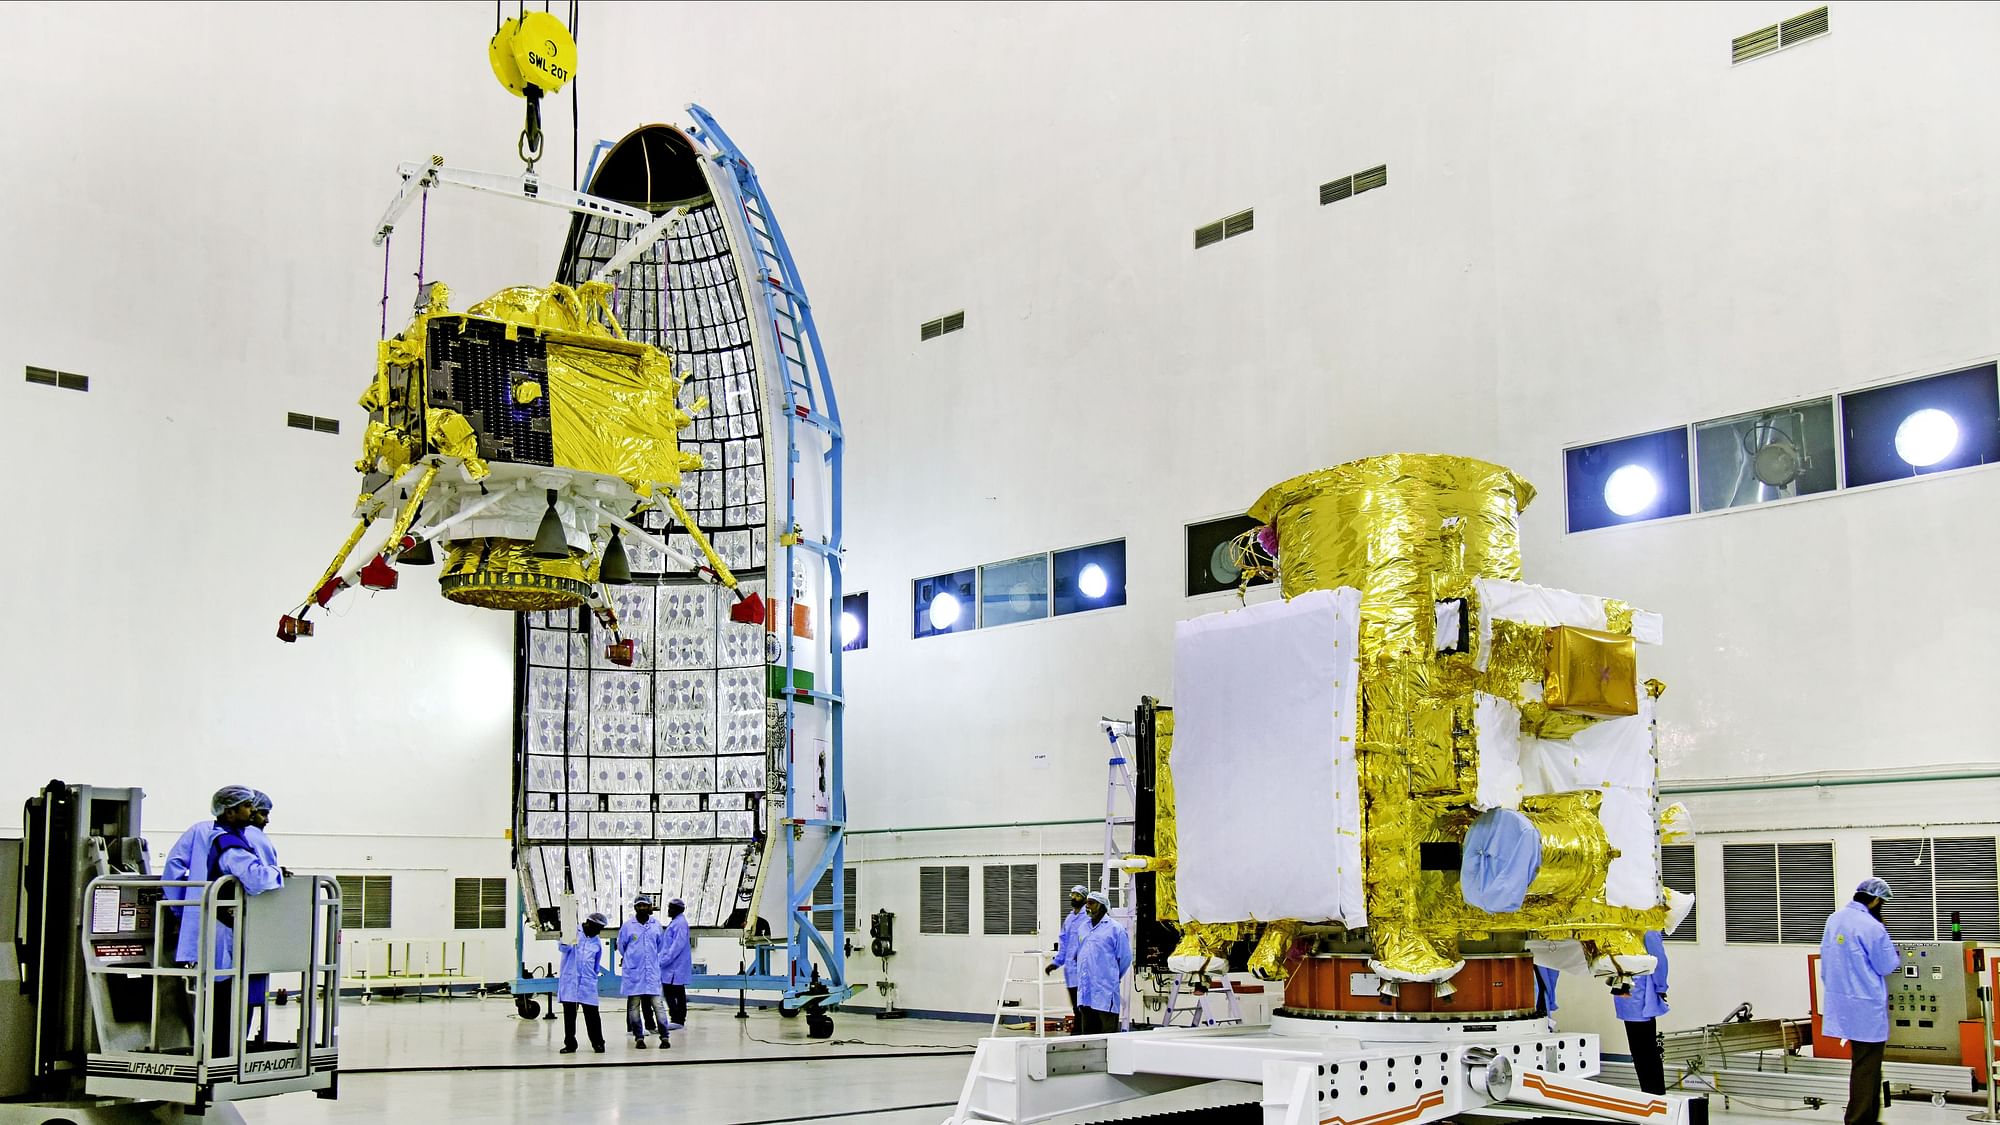 The launch of Chandrayaan-2 was called off in the early hours of Monday.